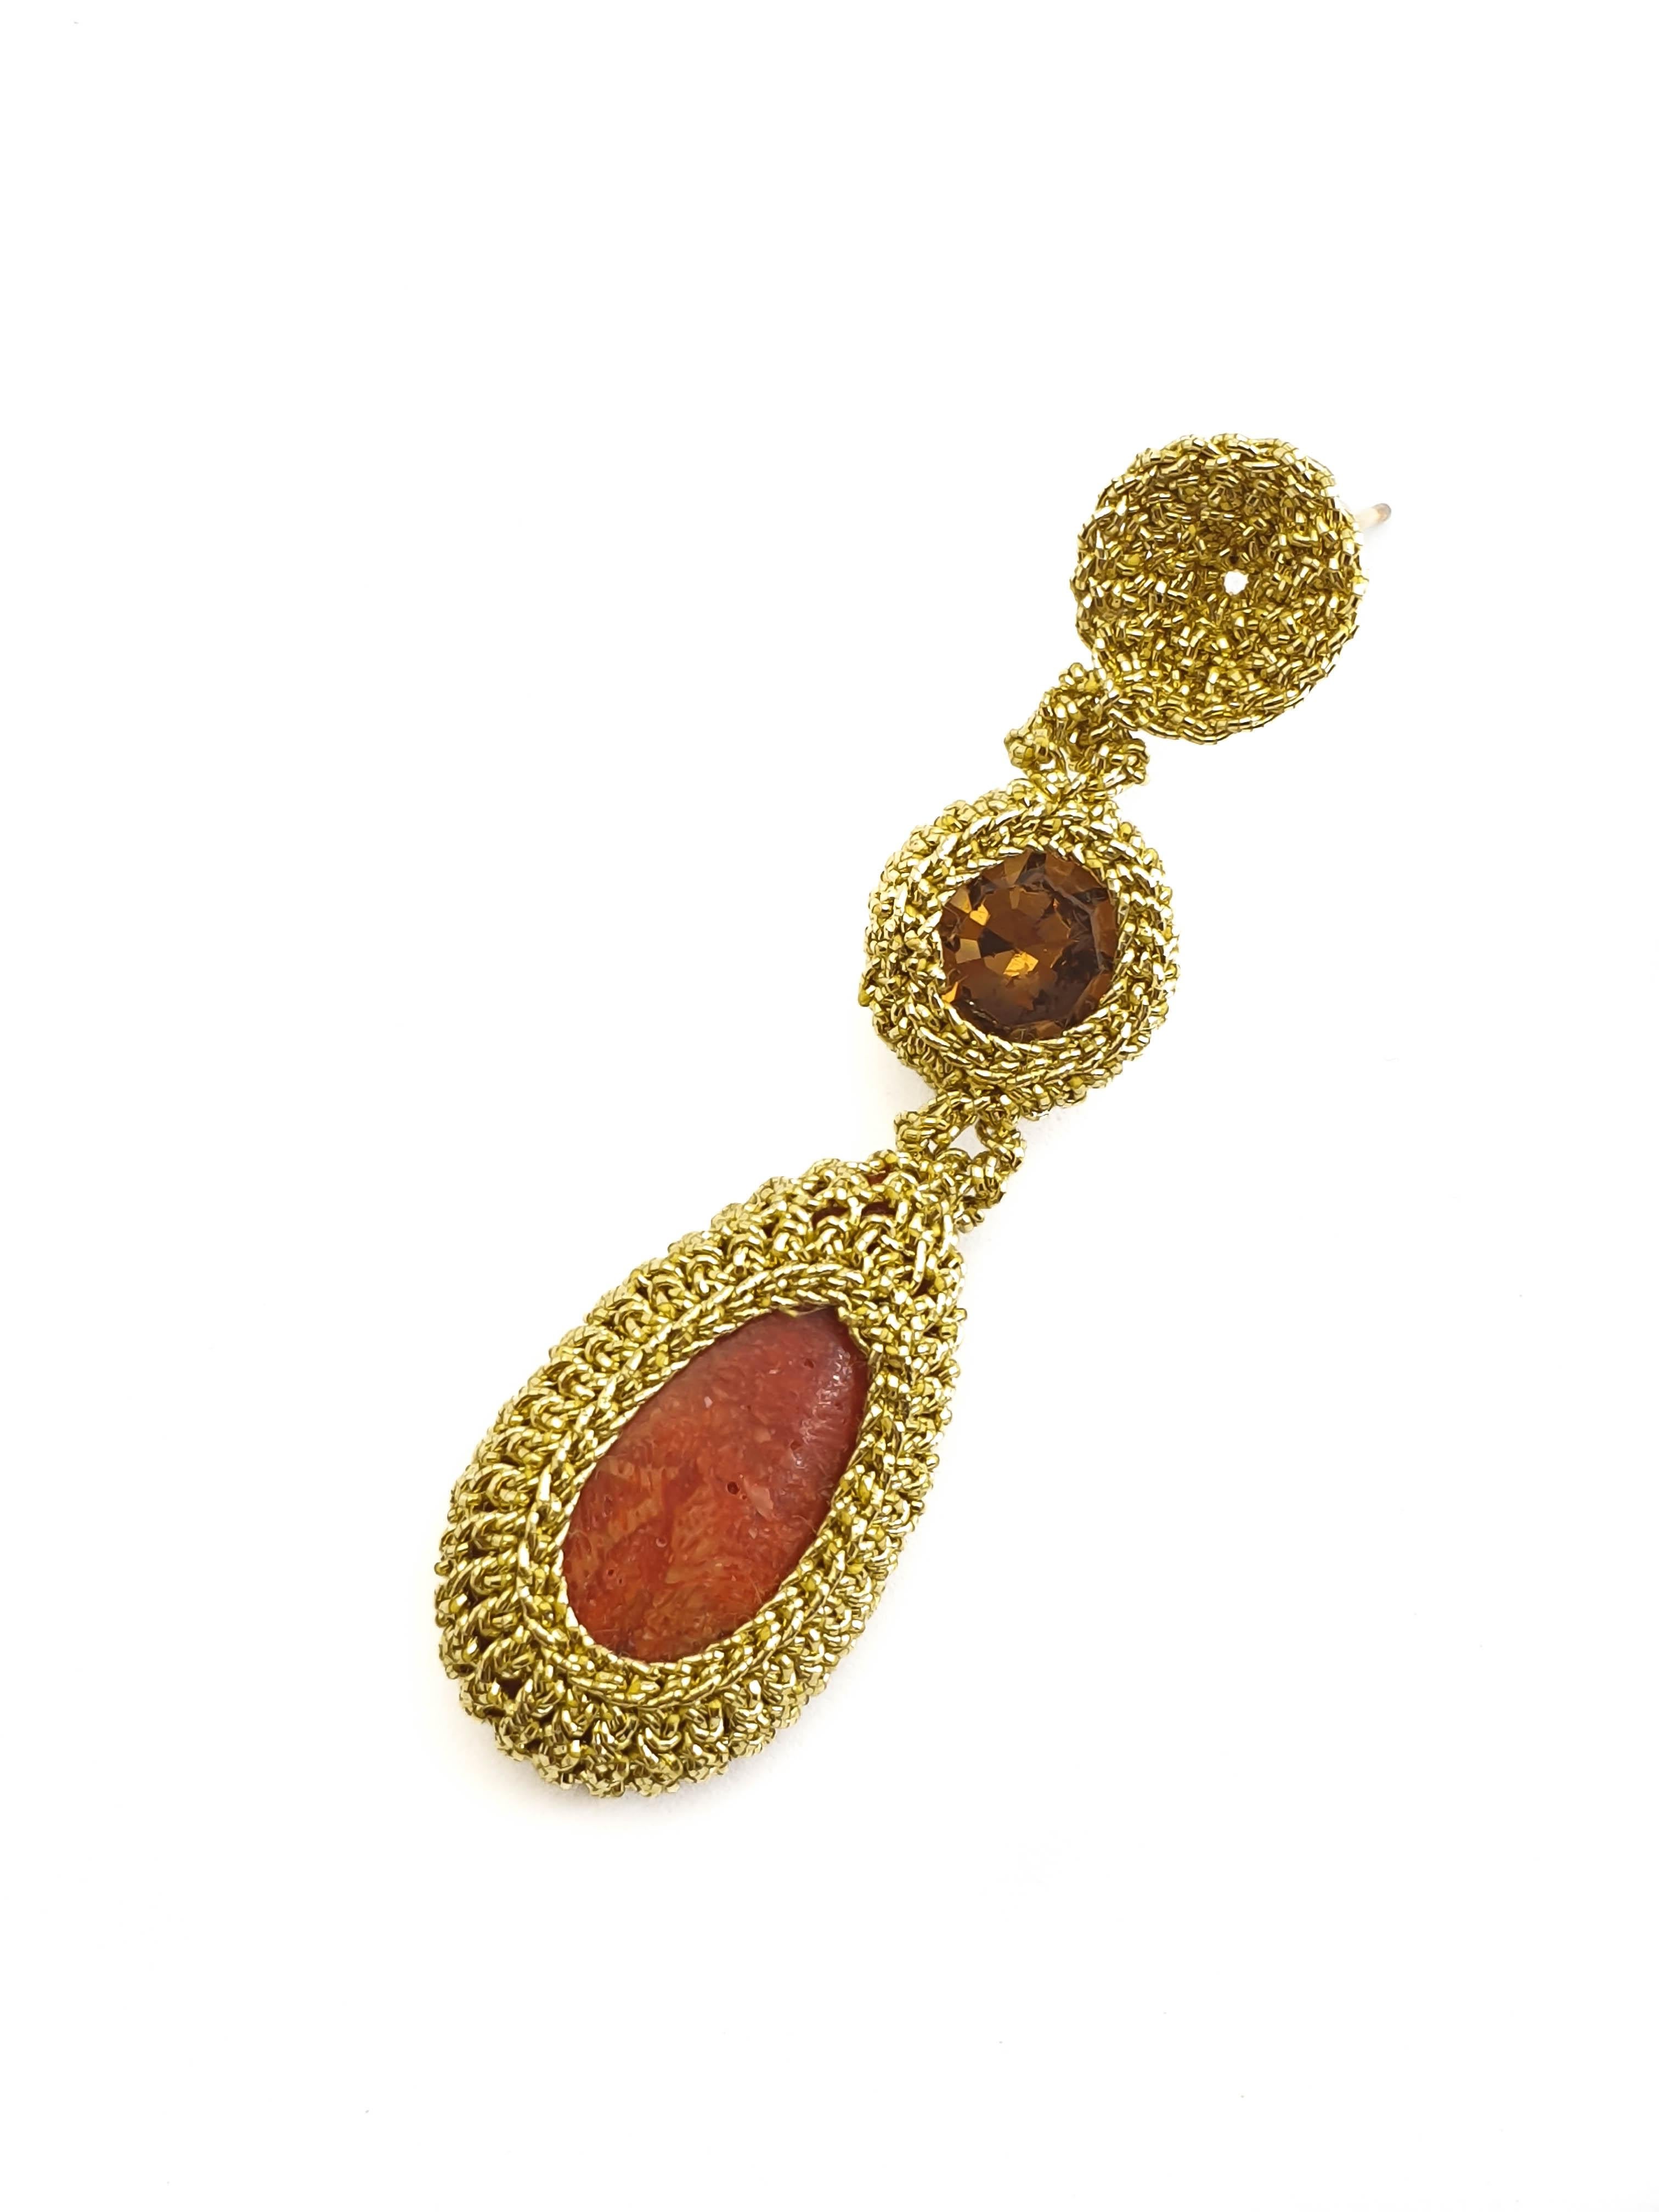 Fashionable, eye catching crochet earrings. Gold color thread tightly crochet around a red corals and brown crystals. 

These earrings can be custom made. Choice of stones can be altered.

The earrings are crochet with a smooth passing thread. It is